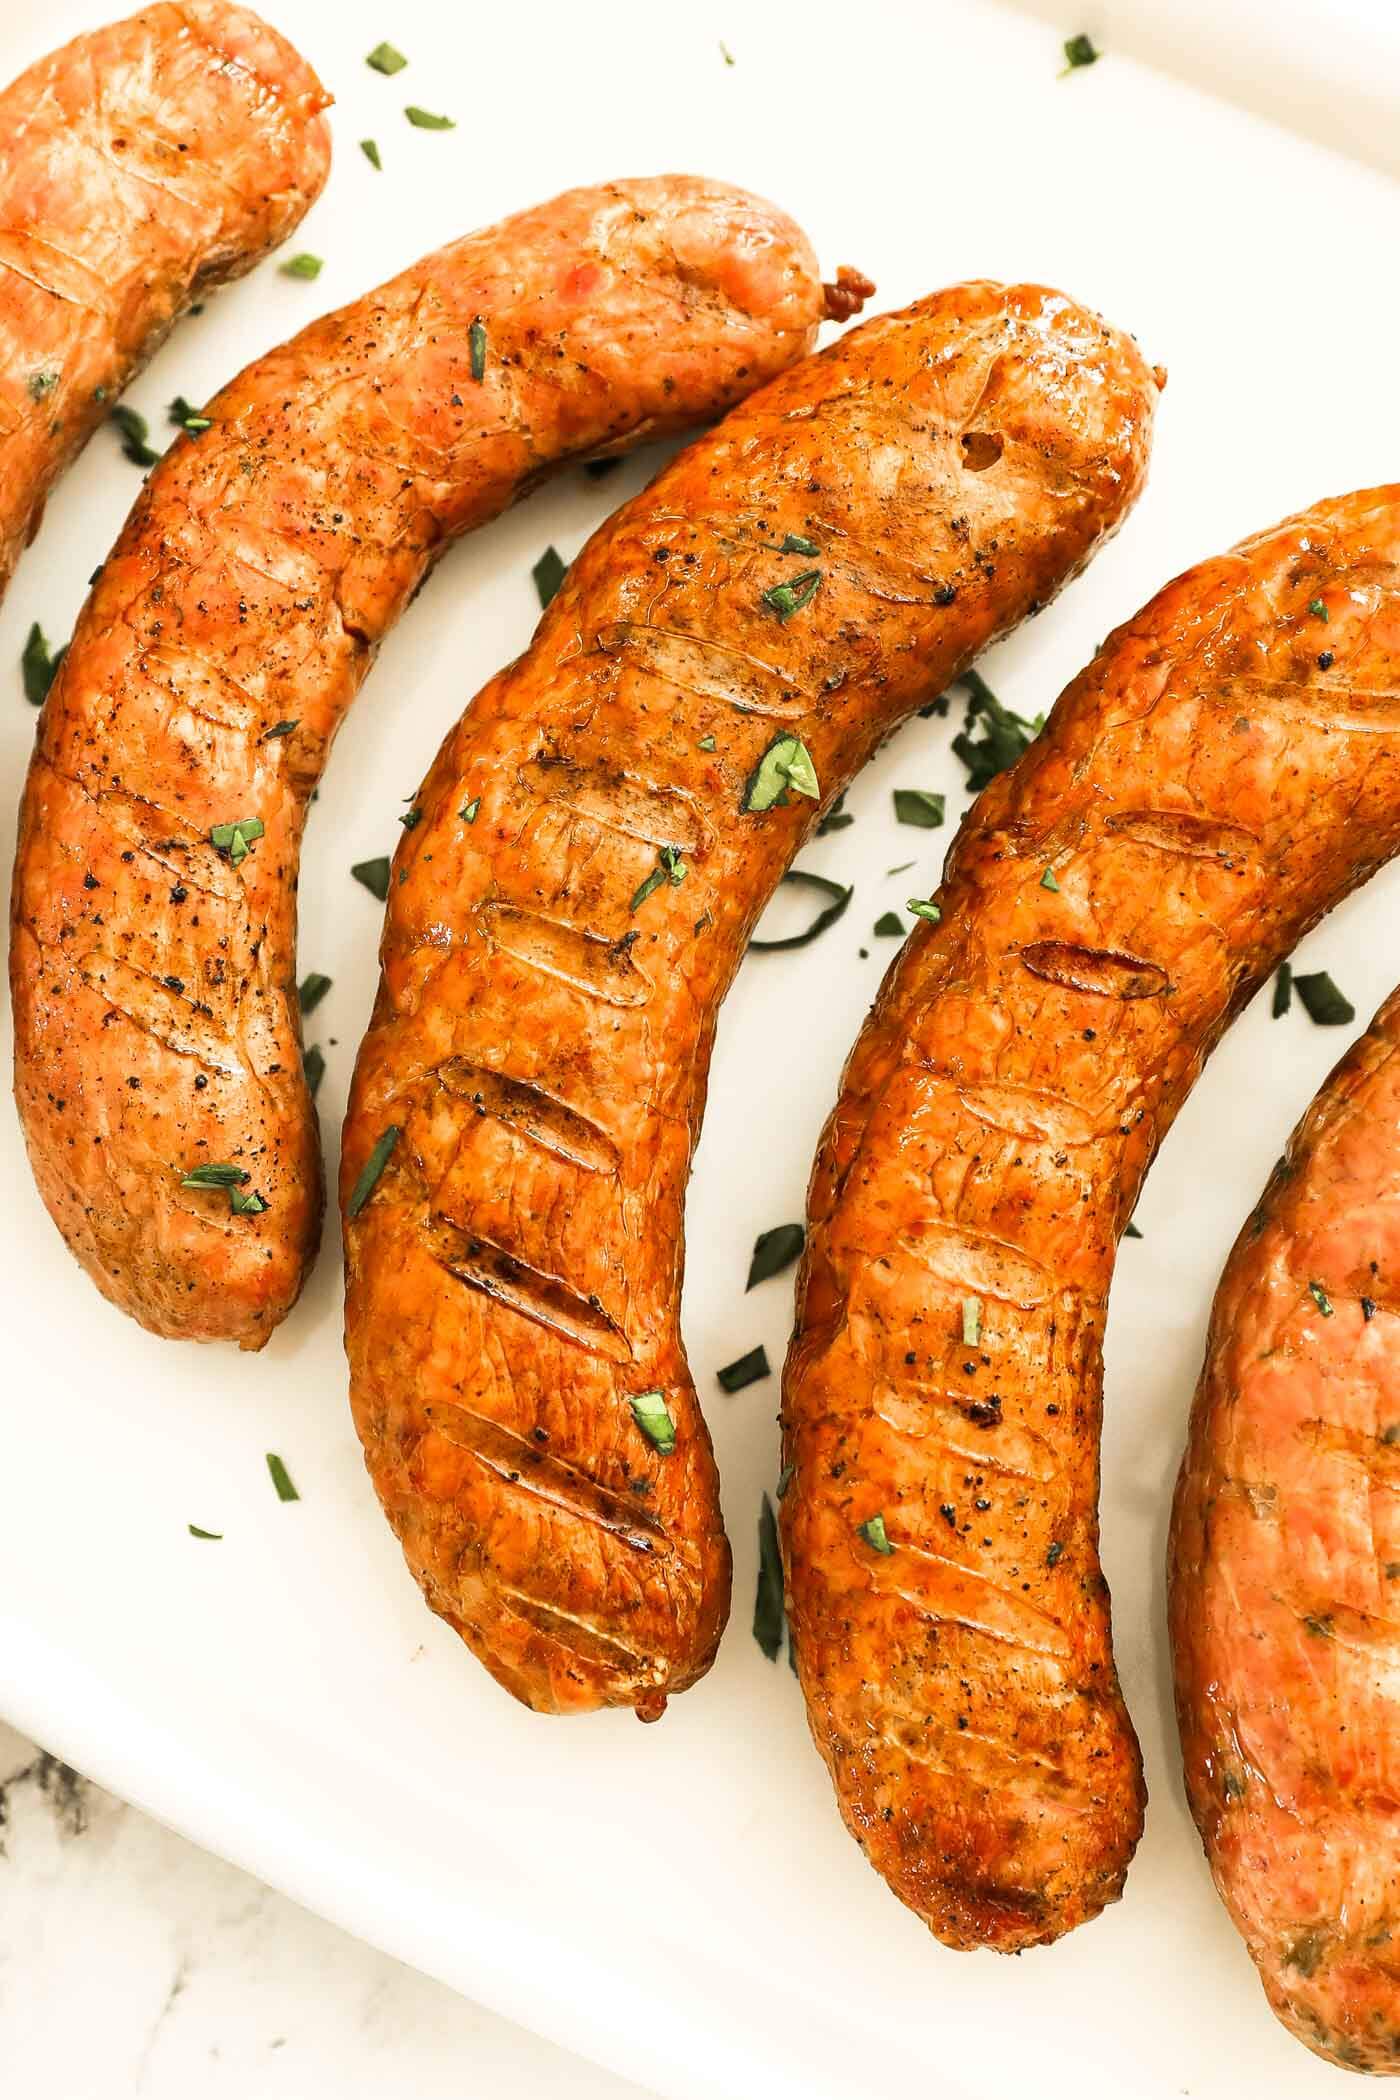 https://realsimplegood.com/wp-content/uploads/Hassle-Free-Smoked-Sausage-Pellet-Grill-or-Smoker-10.jpg